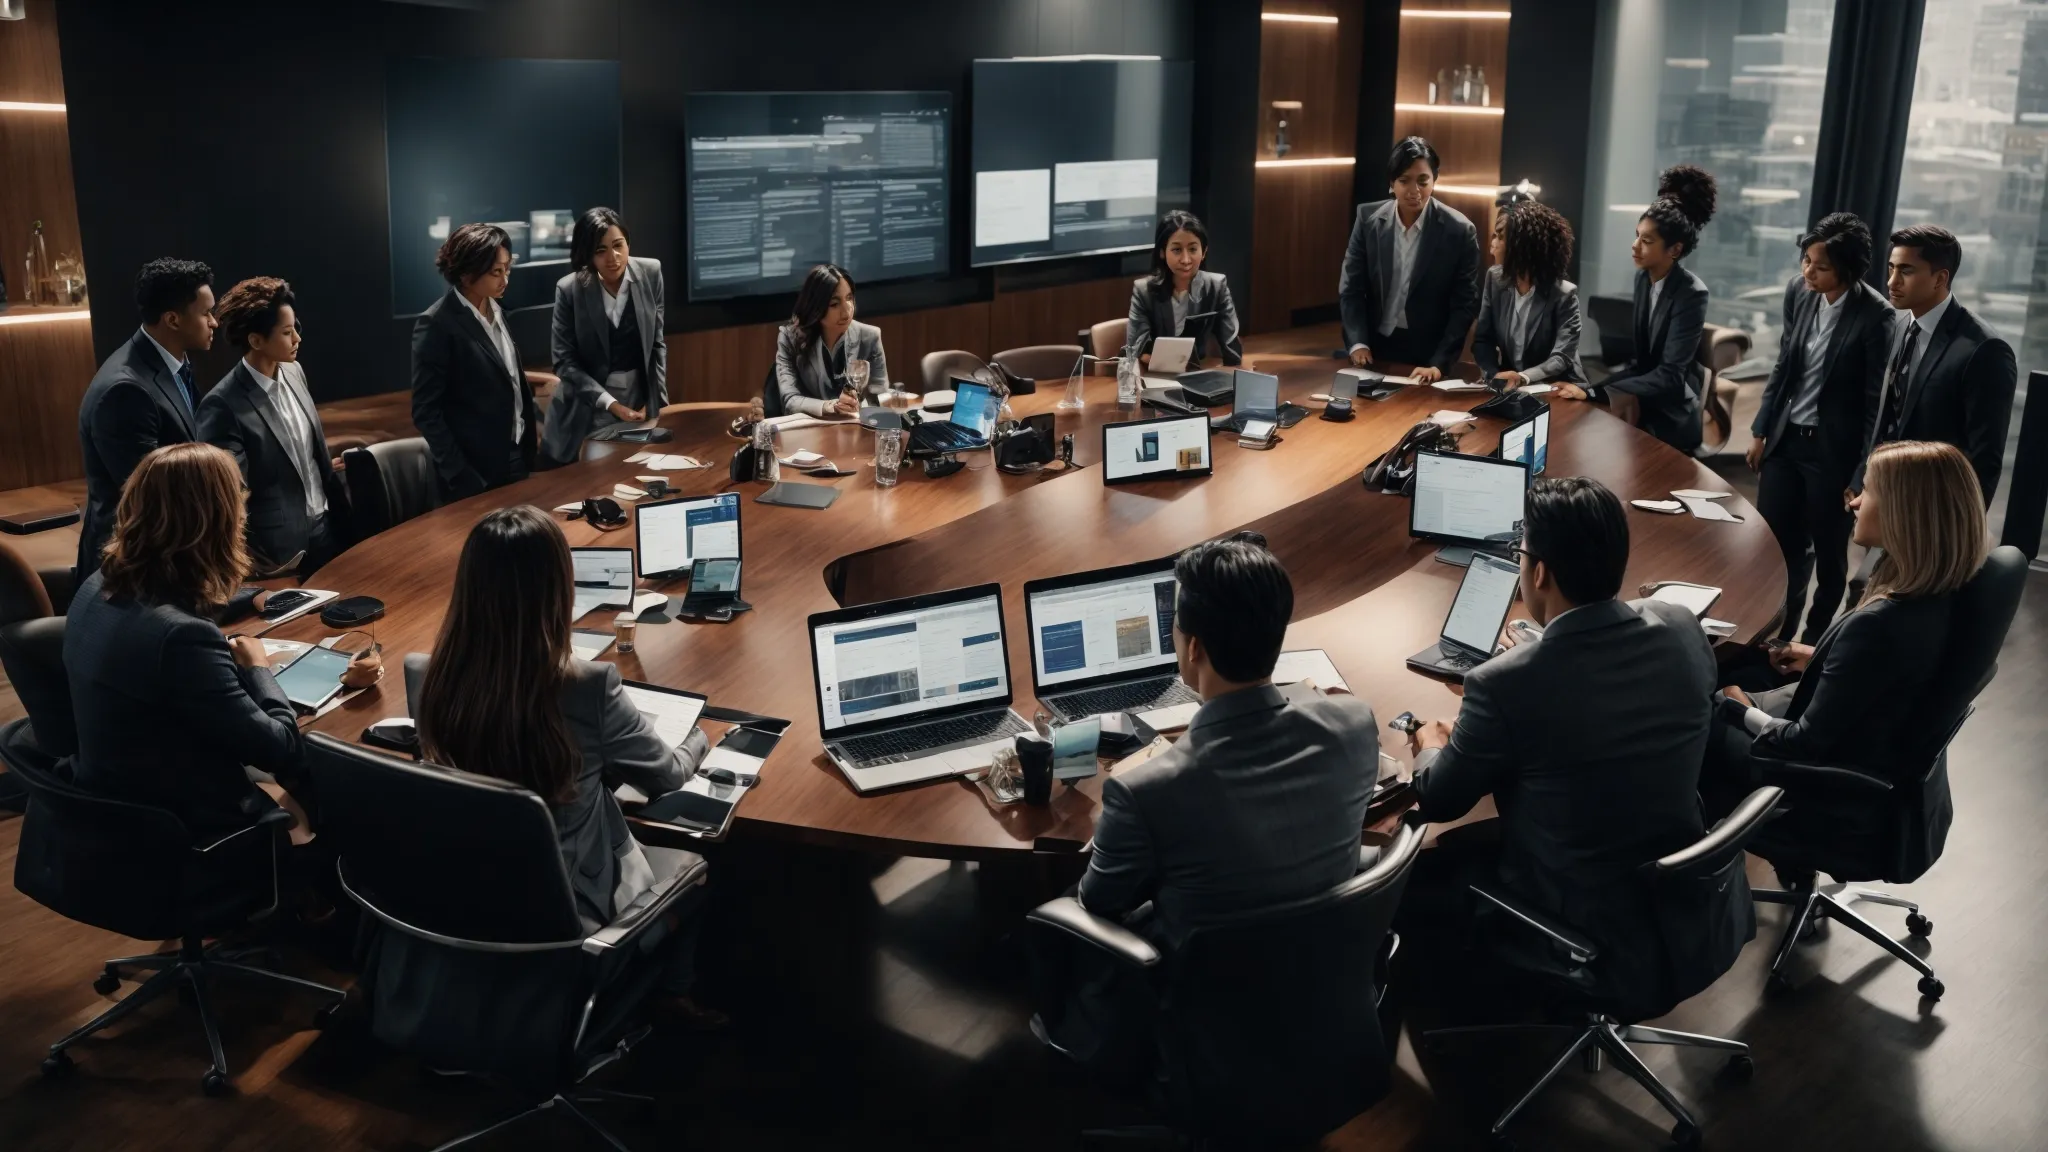 a diverse team of professionals brainstorming around a conference table with multiple digital devices and marketing analytics displayed on a large screen.